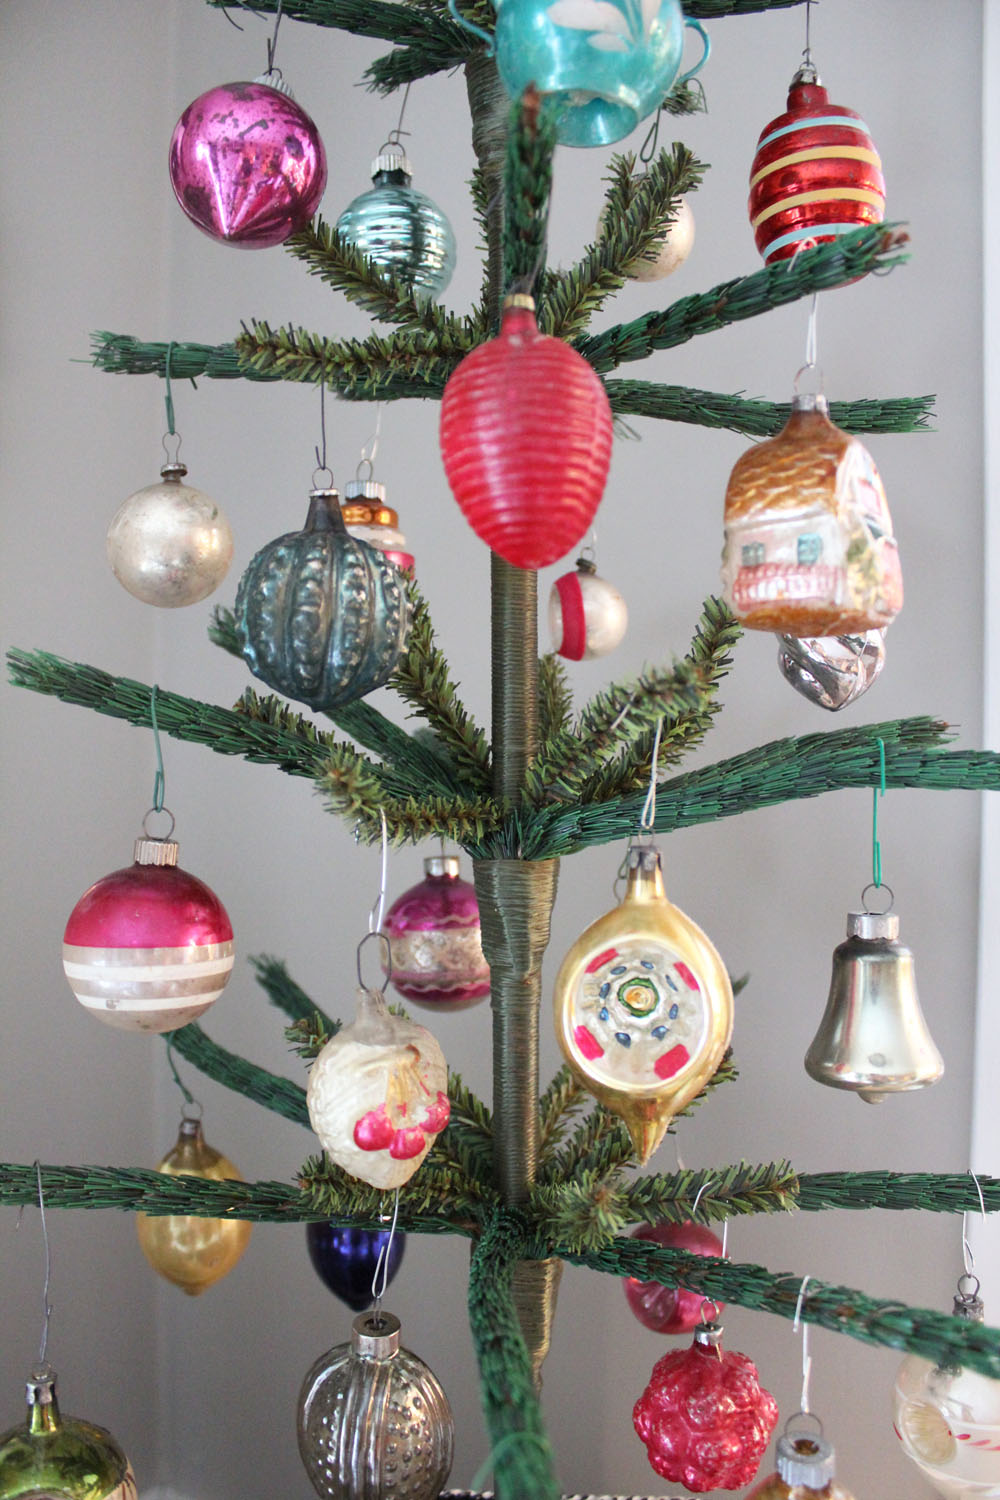 Some Christmas Decorating Ideas From Our Home... - Itsy Bits and Pieces